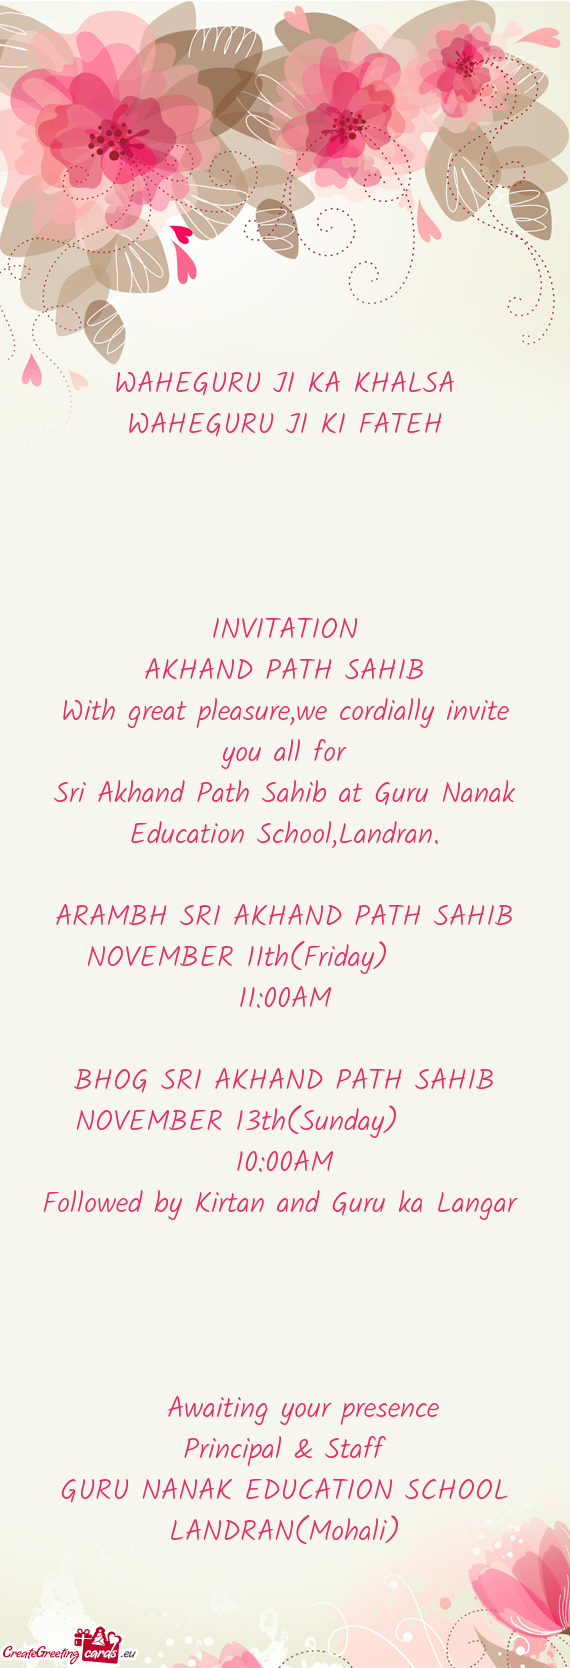 With great pleasure,we cordially invite you all for